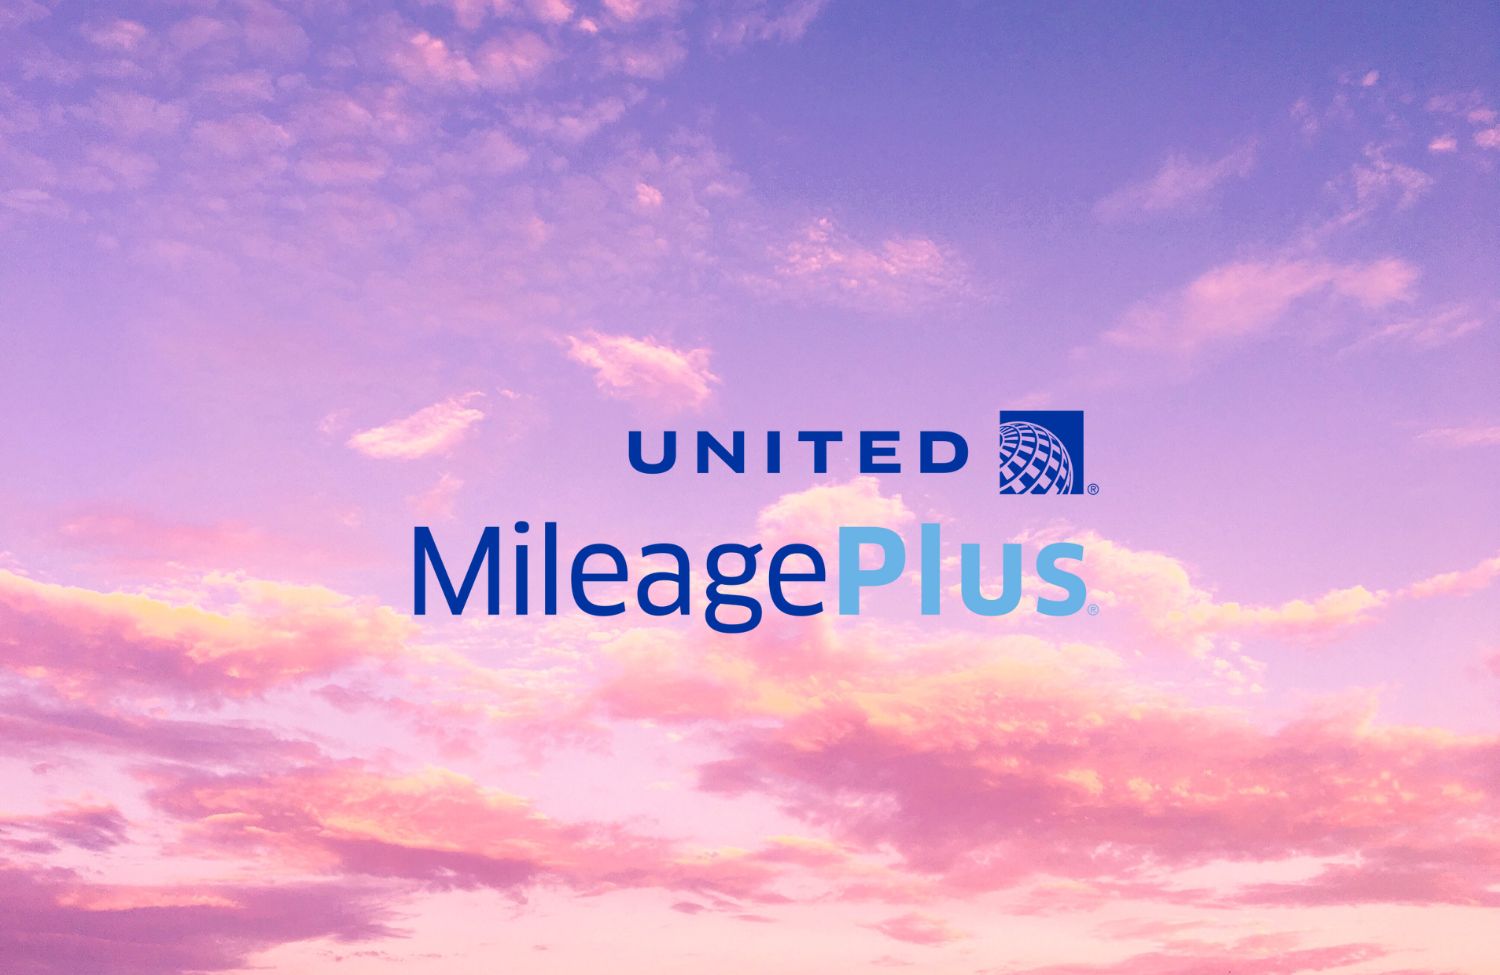 redeem hotel points for MileagePlus miles